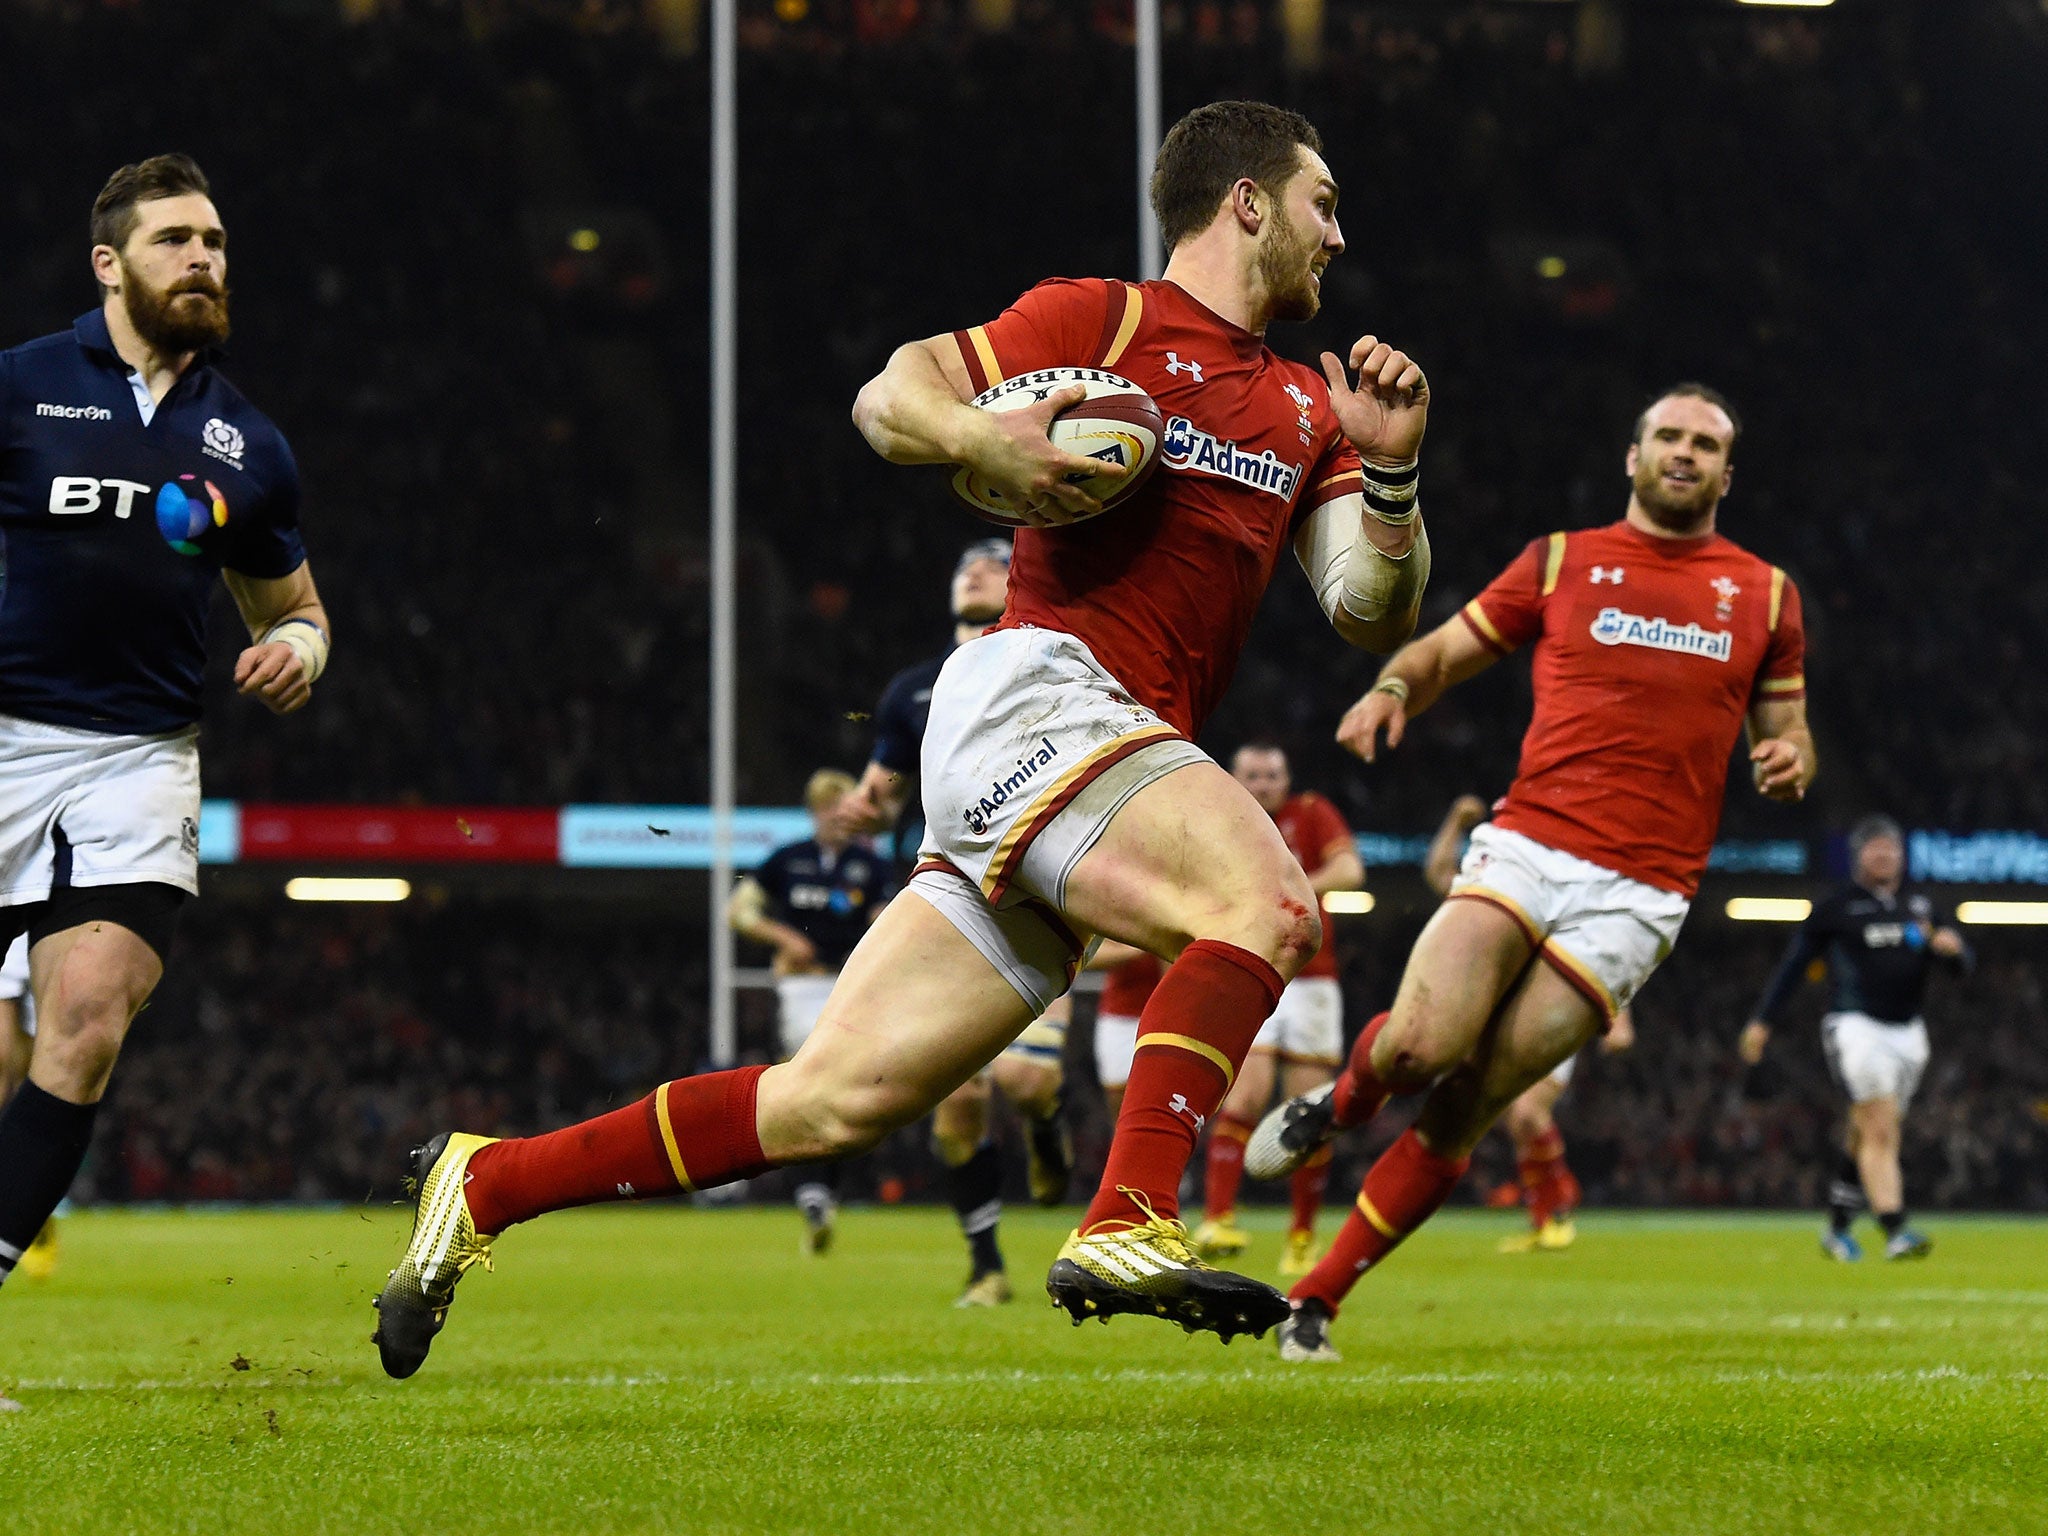 George North capped a fine performance with a sublime try against Scotland.